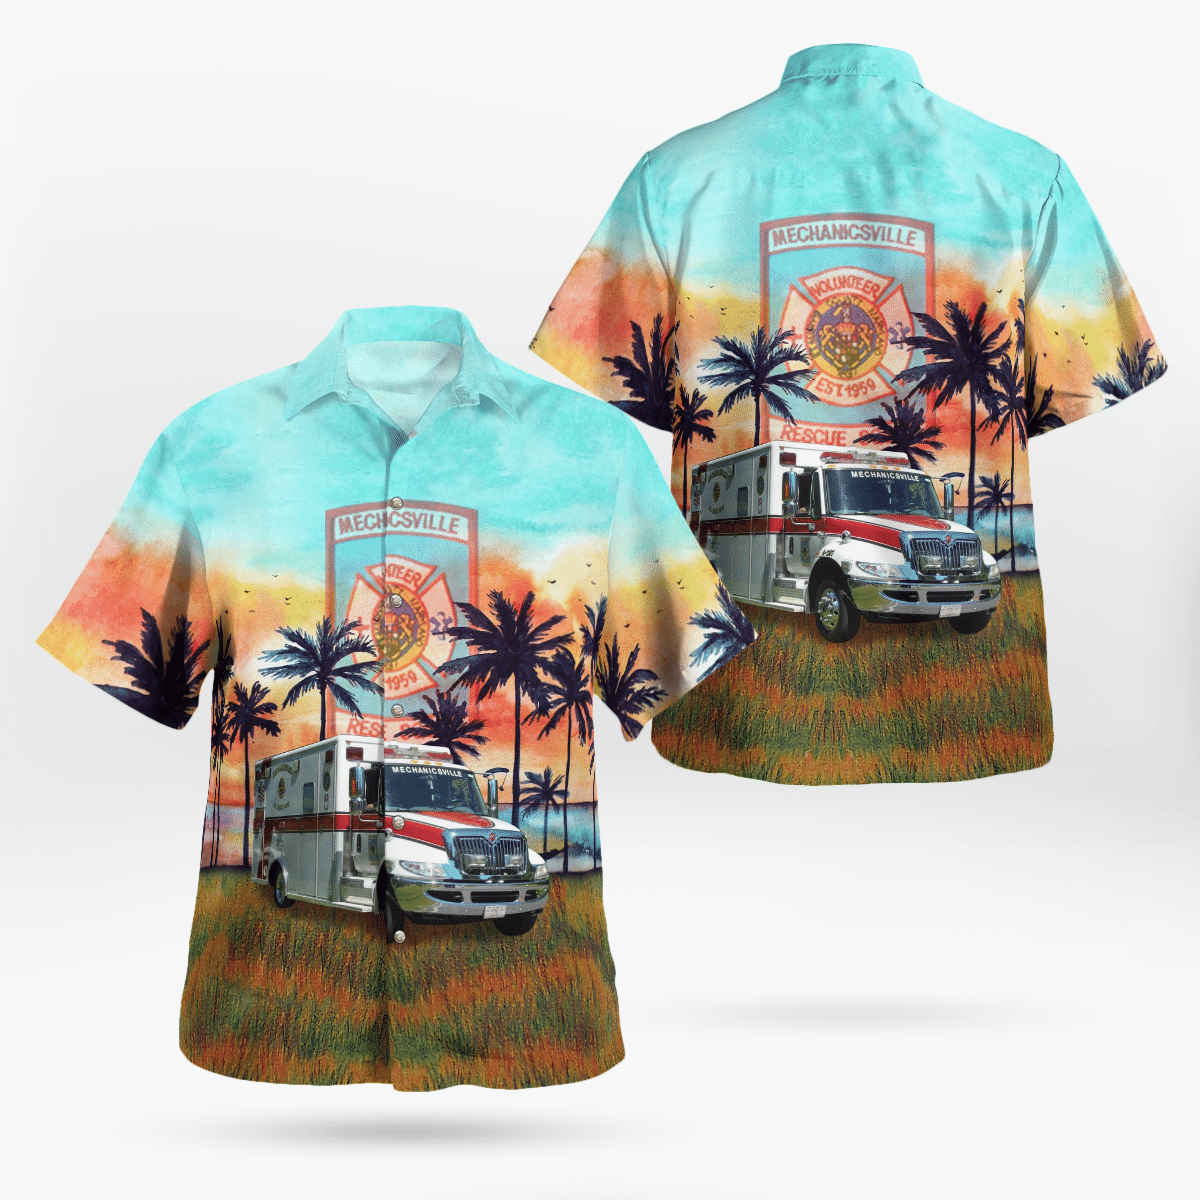 This post will help you find the perfect Hawaiian Shirt for your need 365